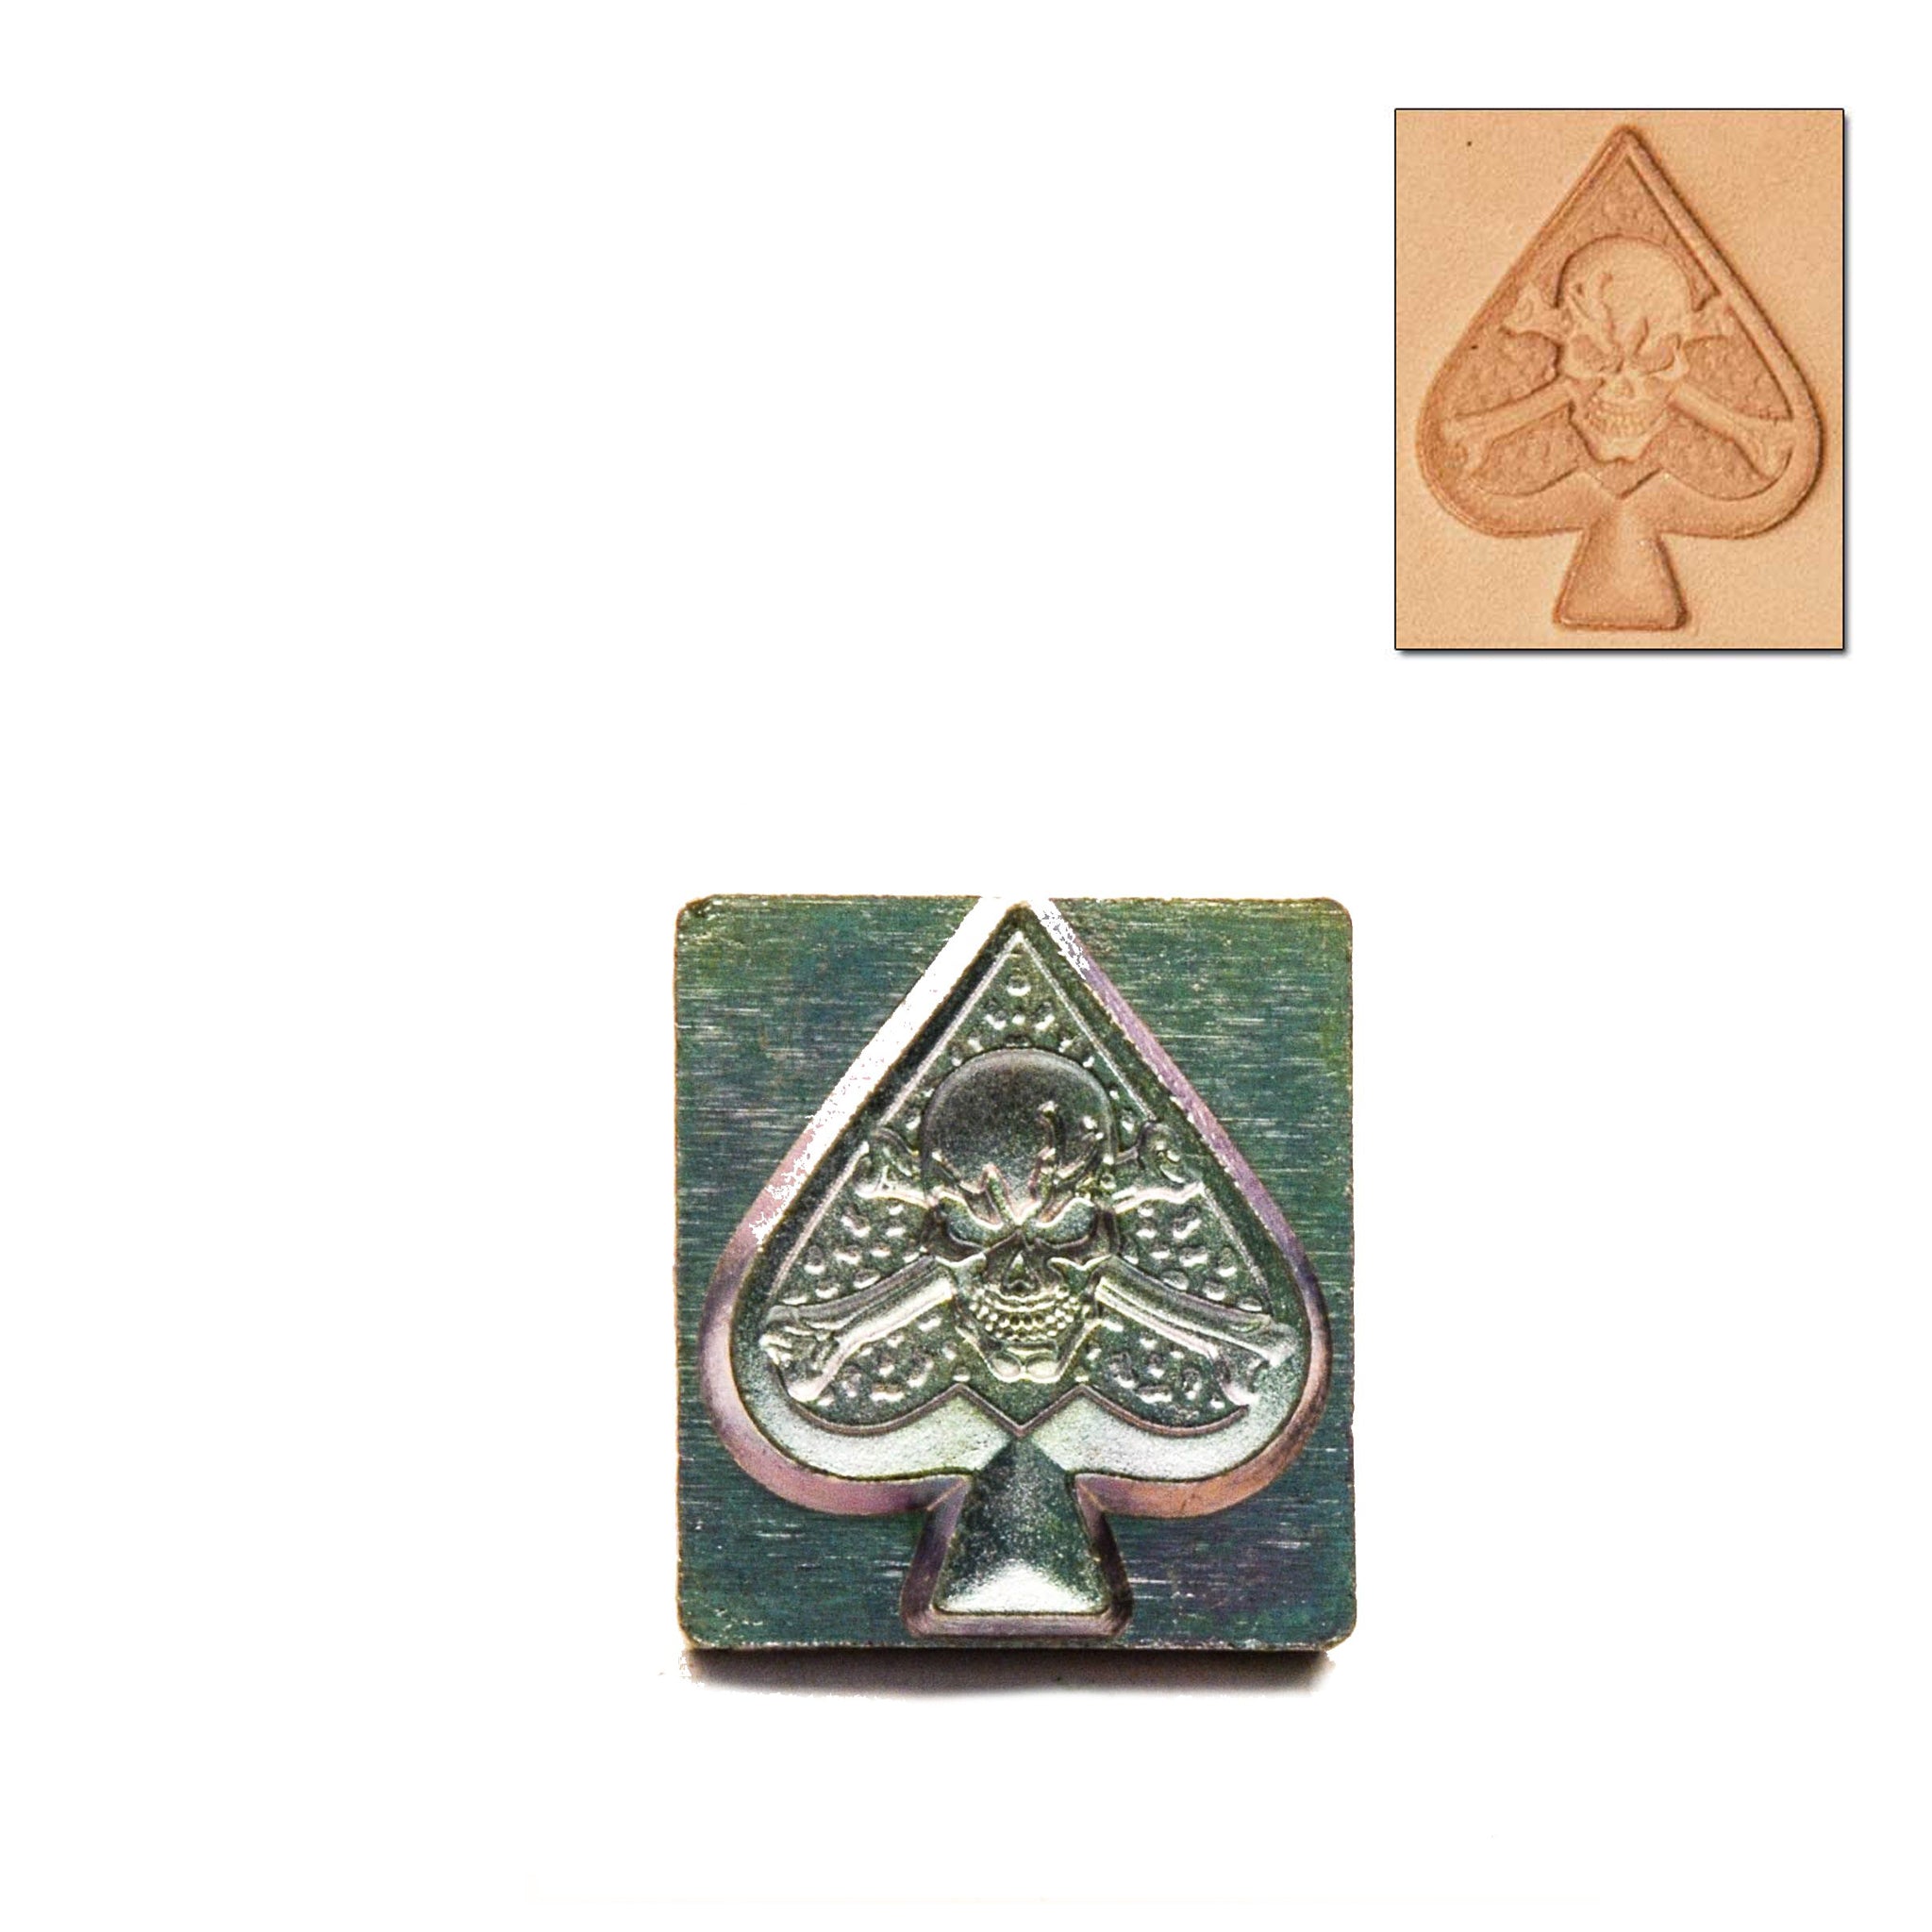 Ace of Spades 3d Embossing Stamp from Identity Leathercraft